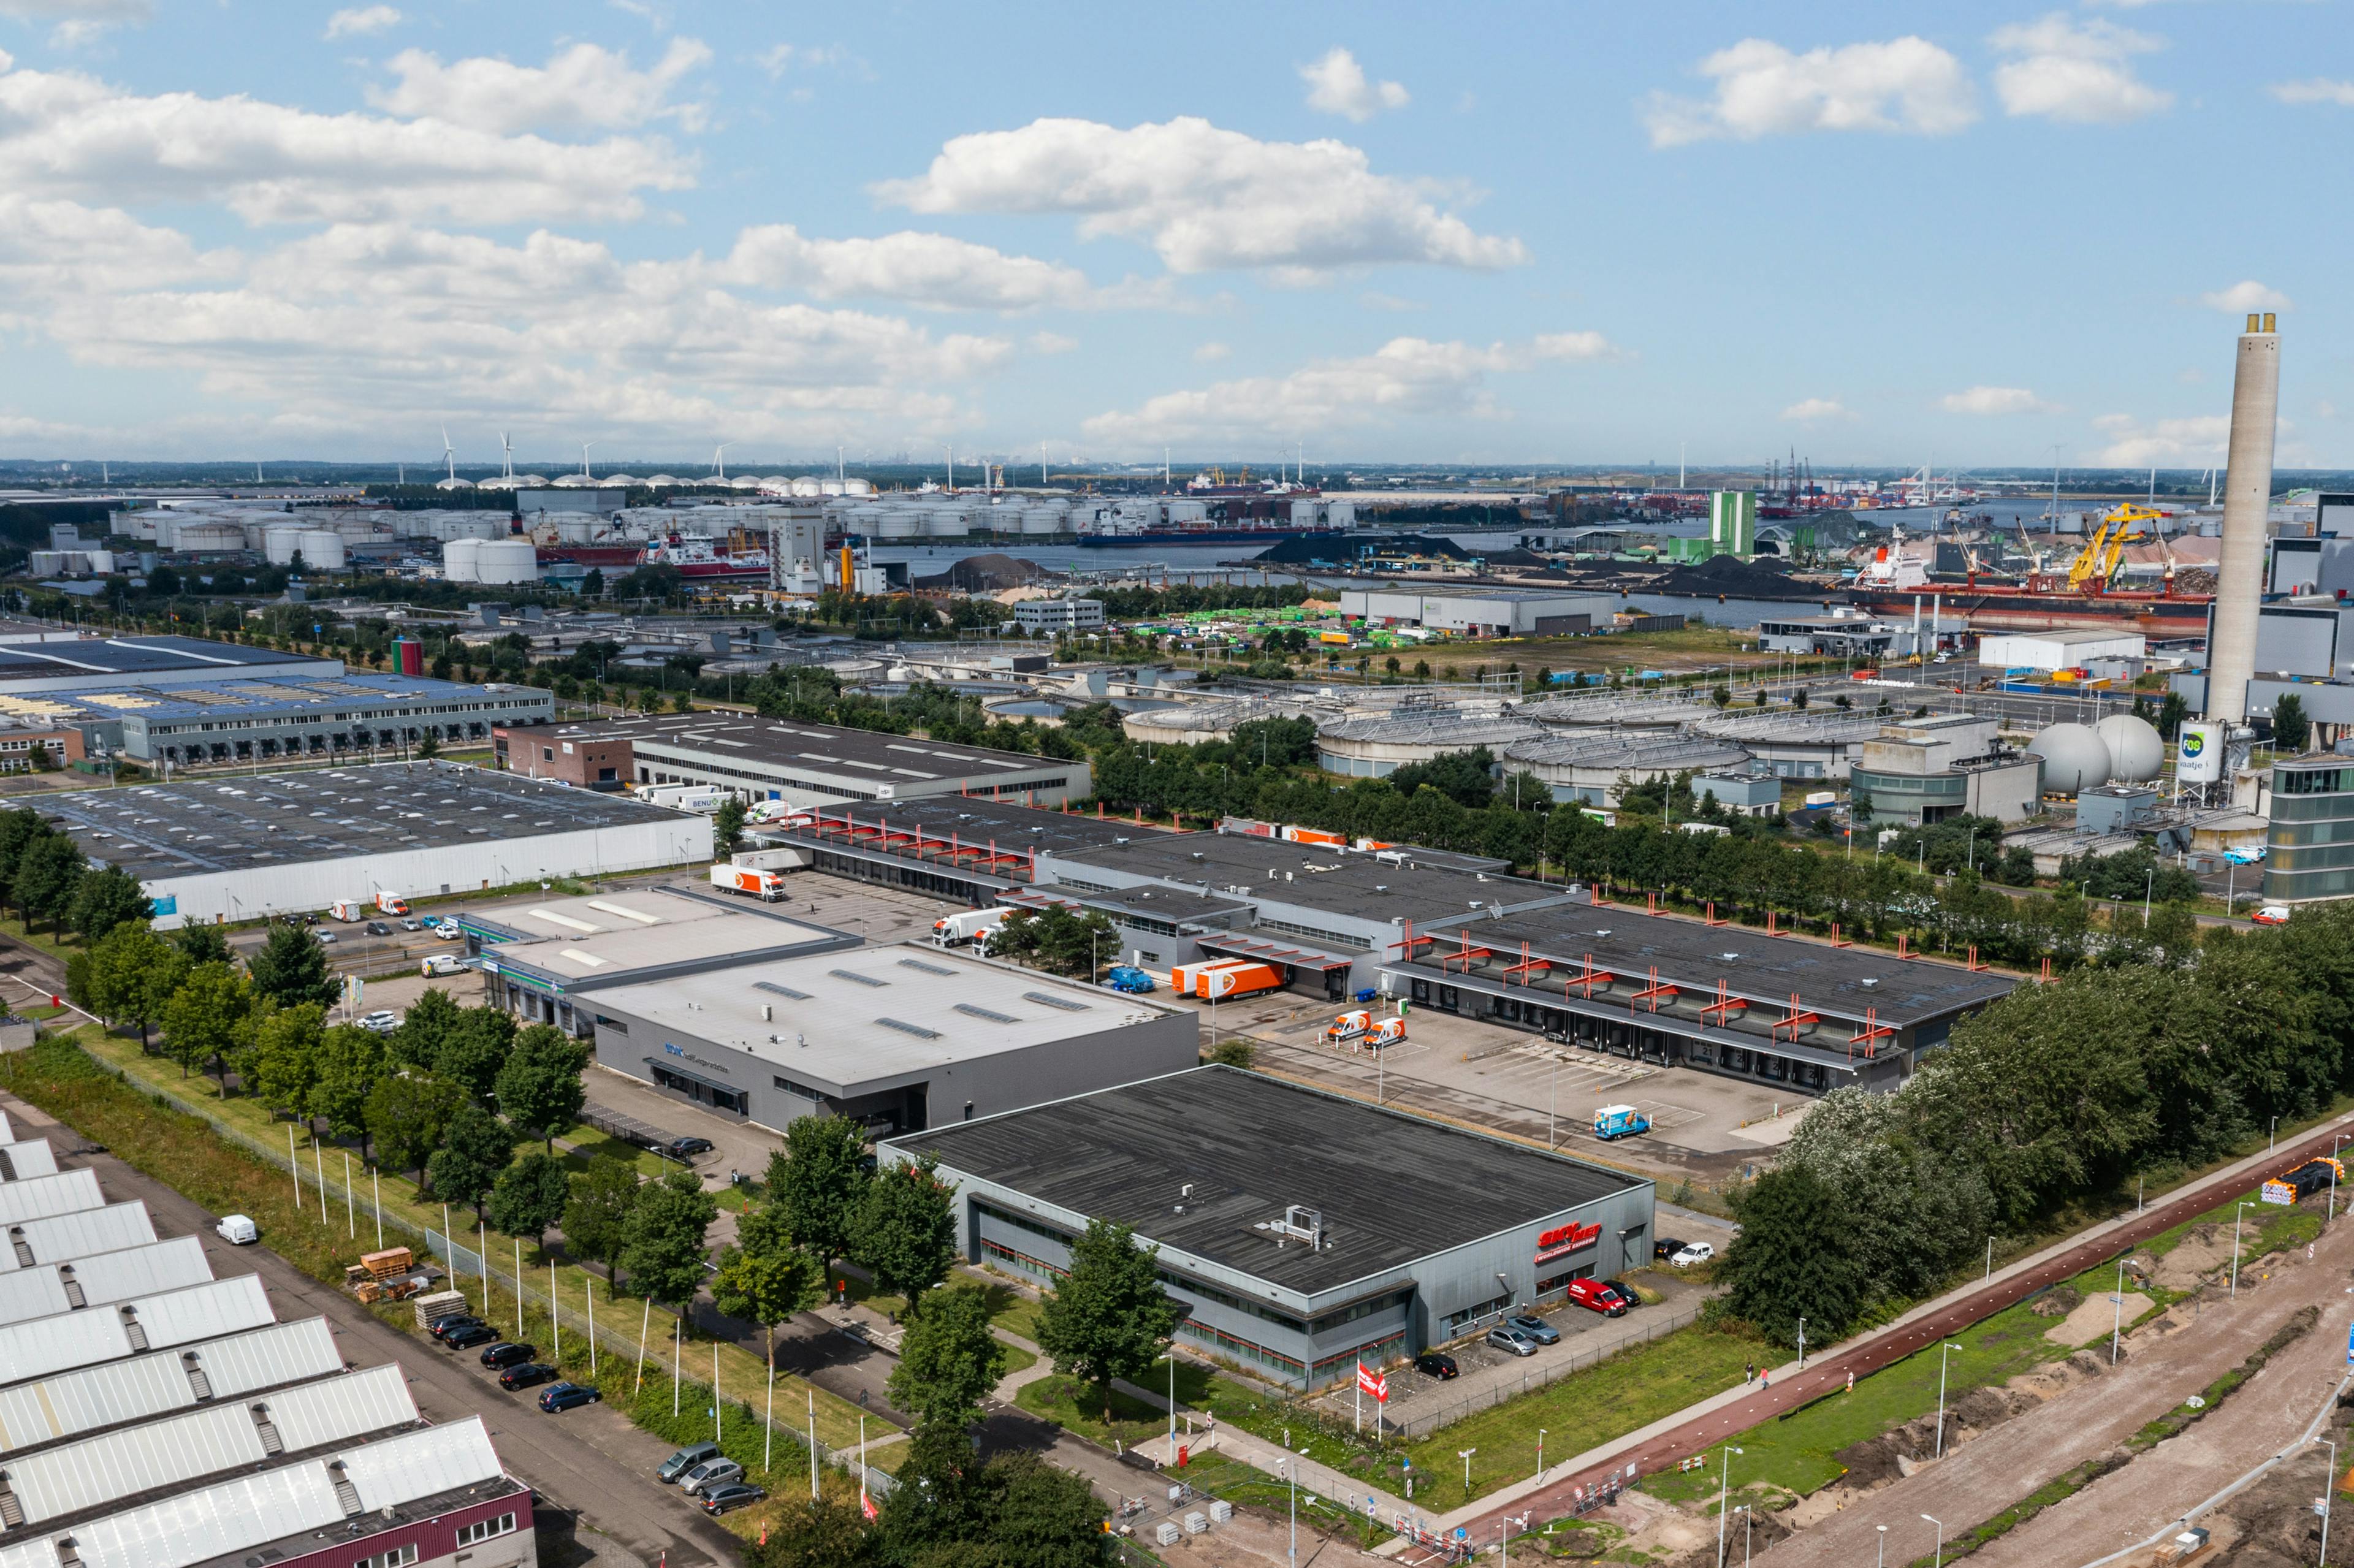 Warehouses with parking spaces and loading bays, including a warehouse for PostNL